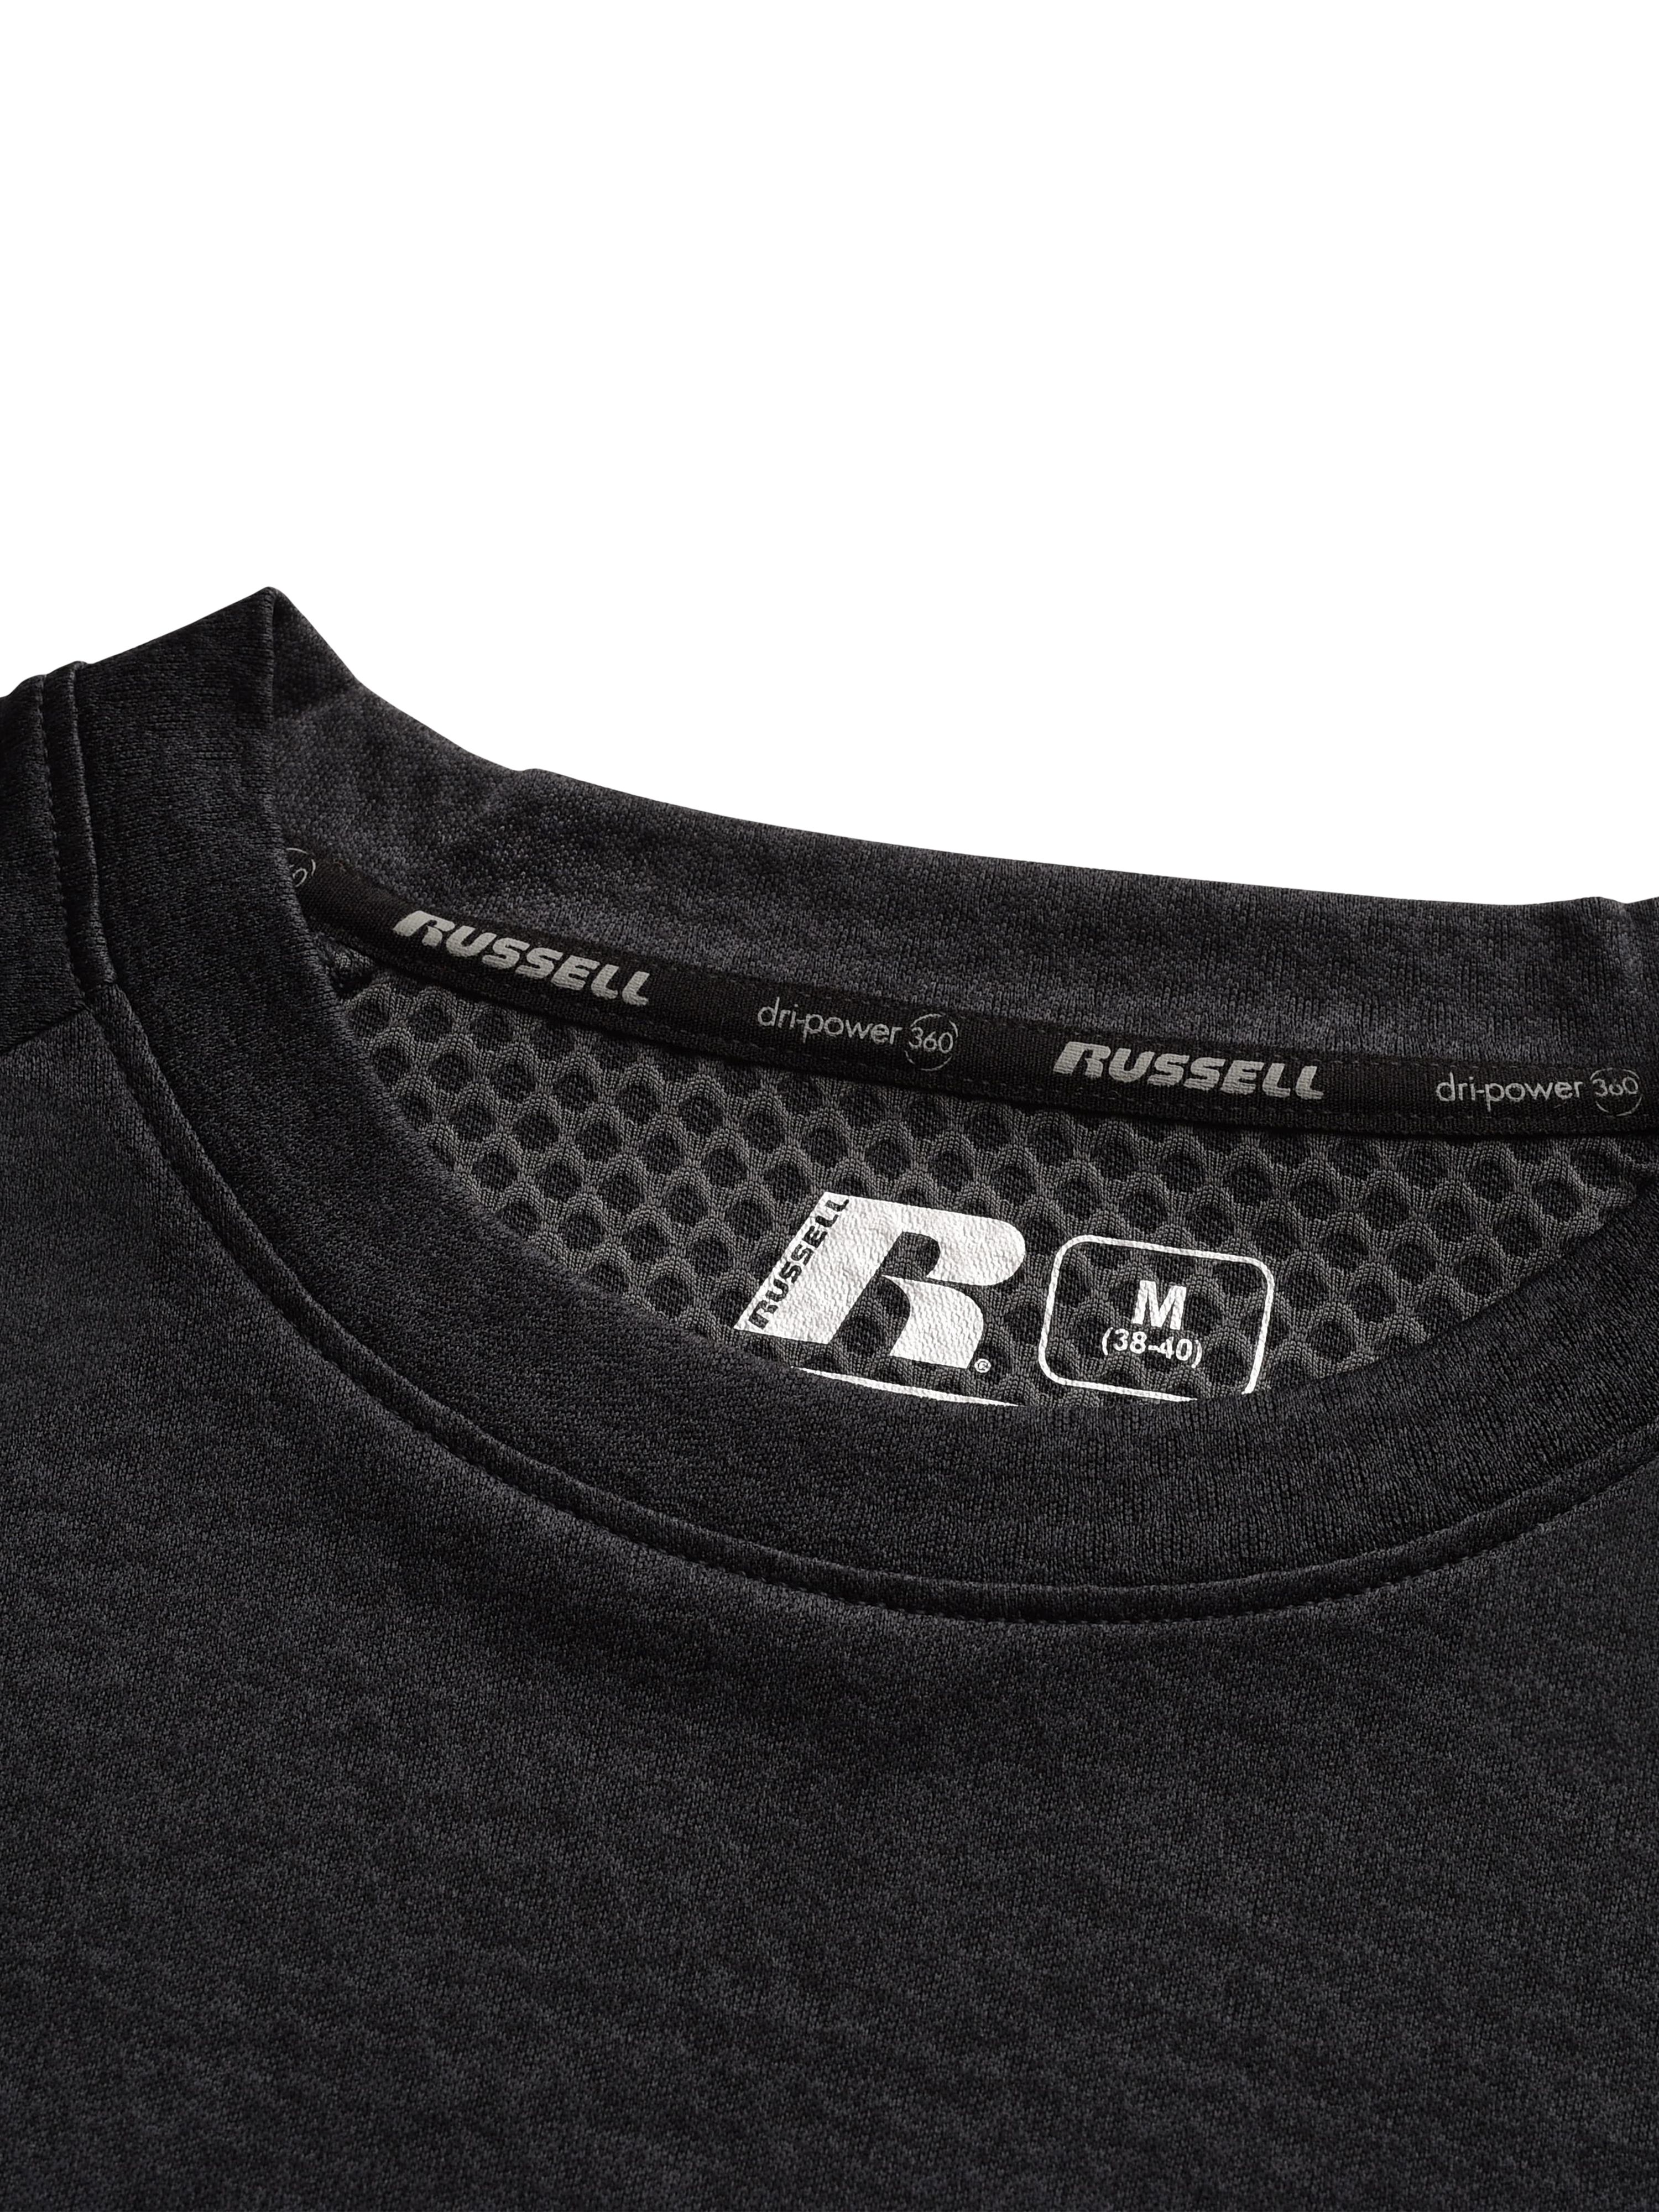 Russell Men's and Big Men's Long Sleeve Performance Tee, up to Size 5XL - image 2 of 7